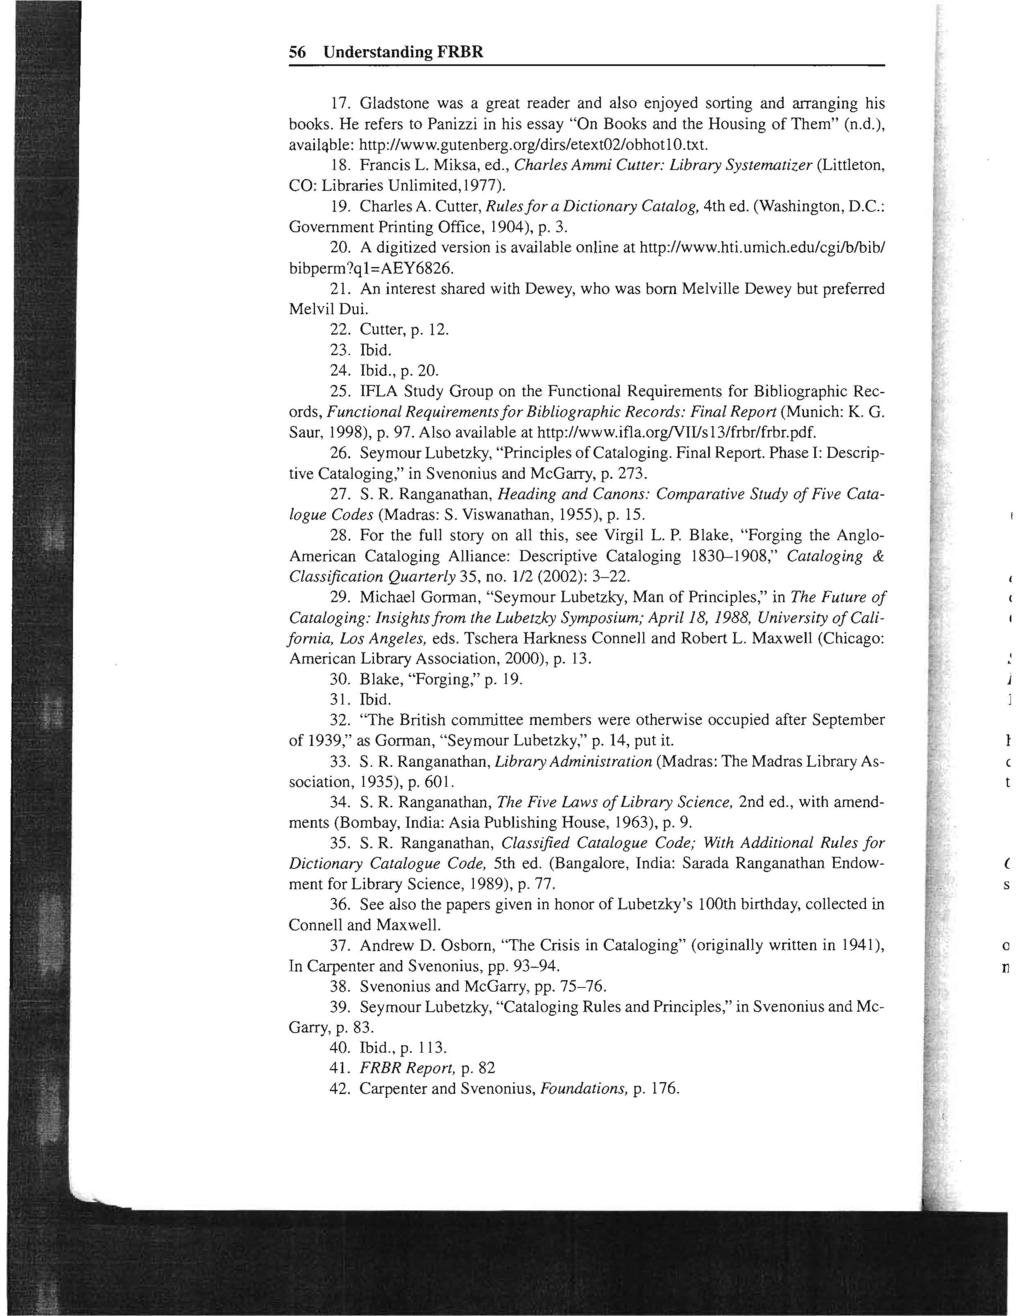 56 Understanding FRBR 17. Gladstone was a great reader and also enjoyed sorting and arranging his books. He refers to Panizzi in his essay "On Books and the Housing of Them" (n.d.), avail'lble: http://www.